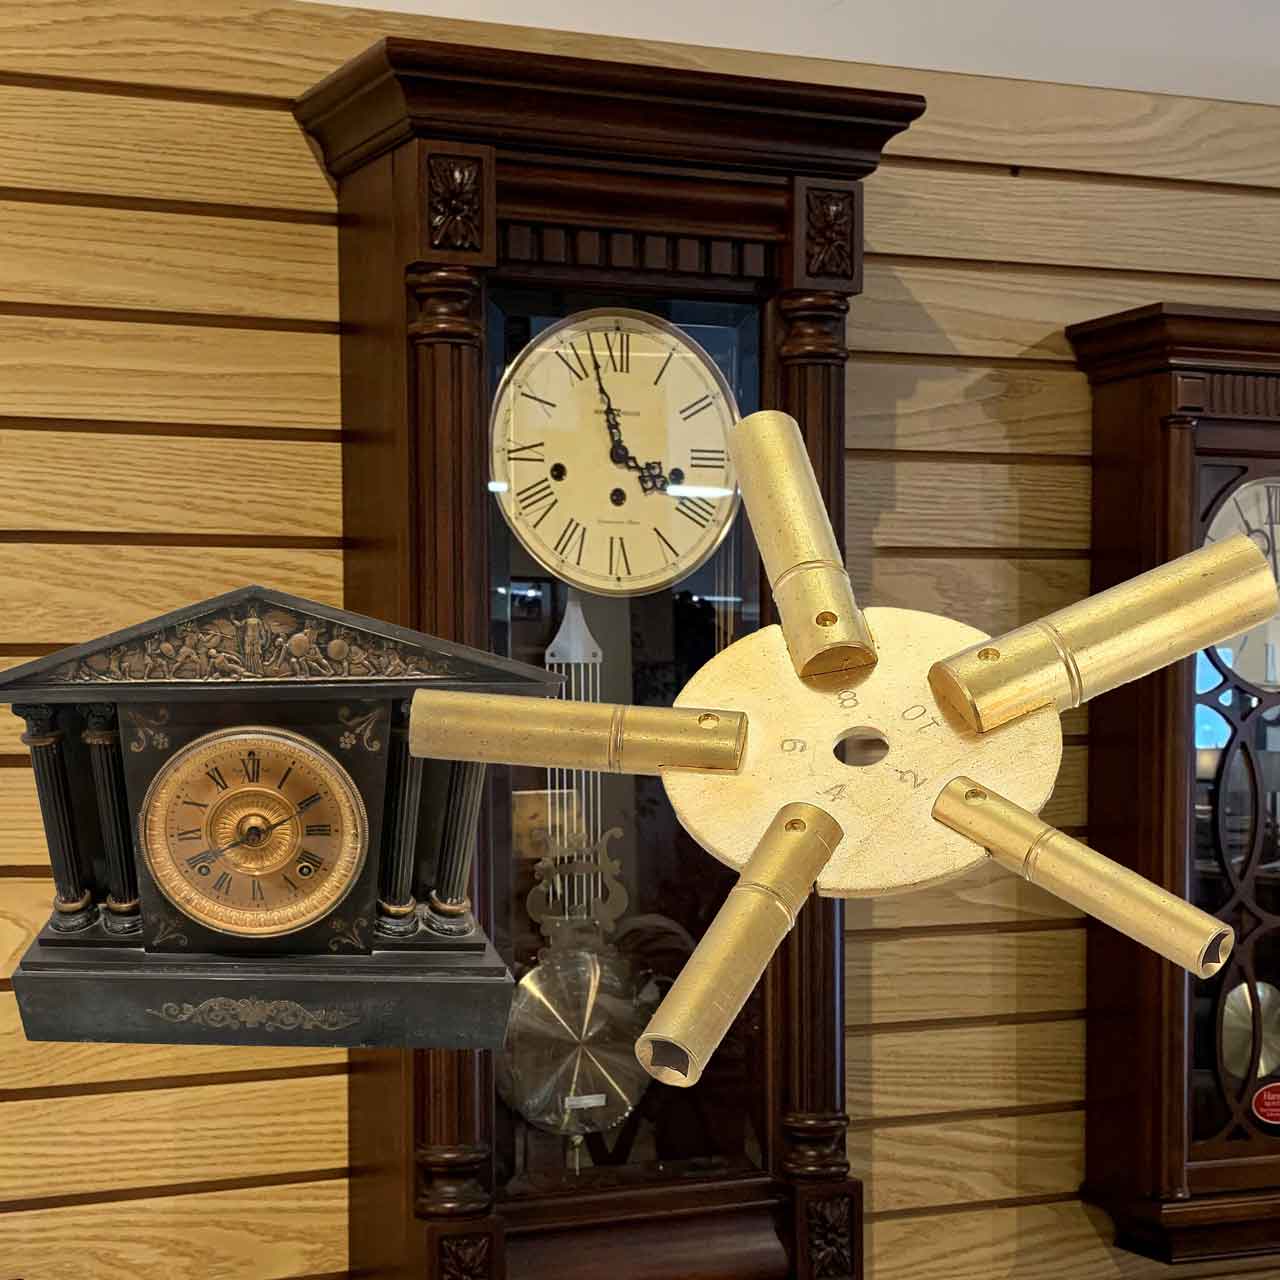 How to Wind a Clock Without a Key: Unlocking the Secrets of Timekeeping